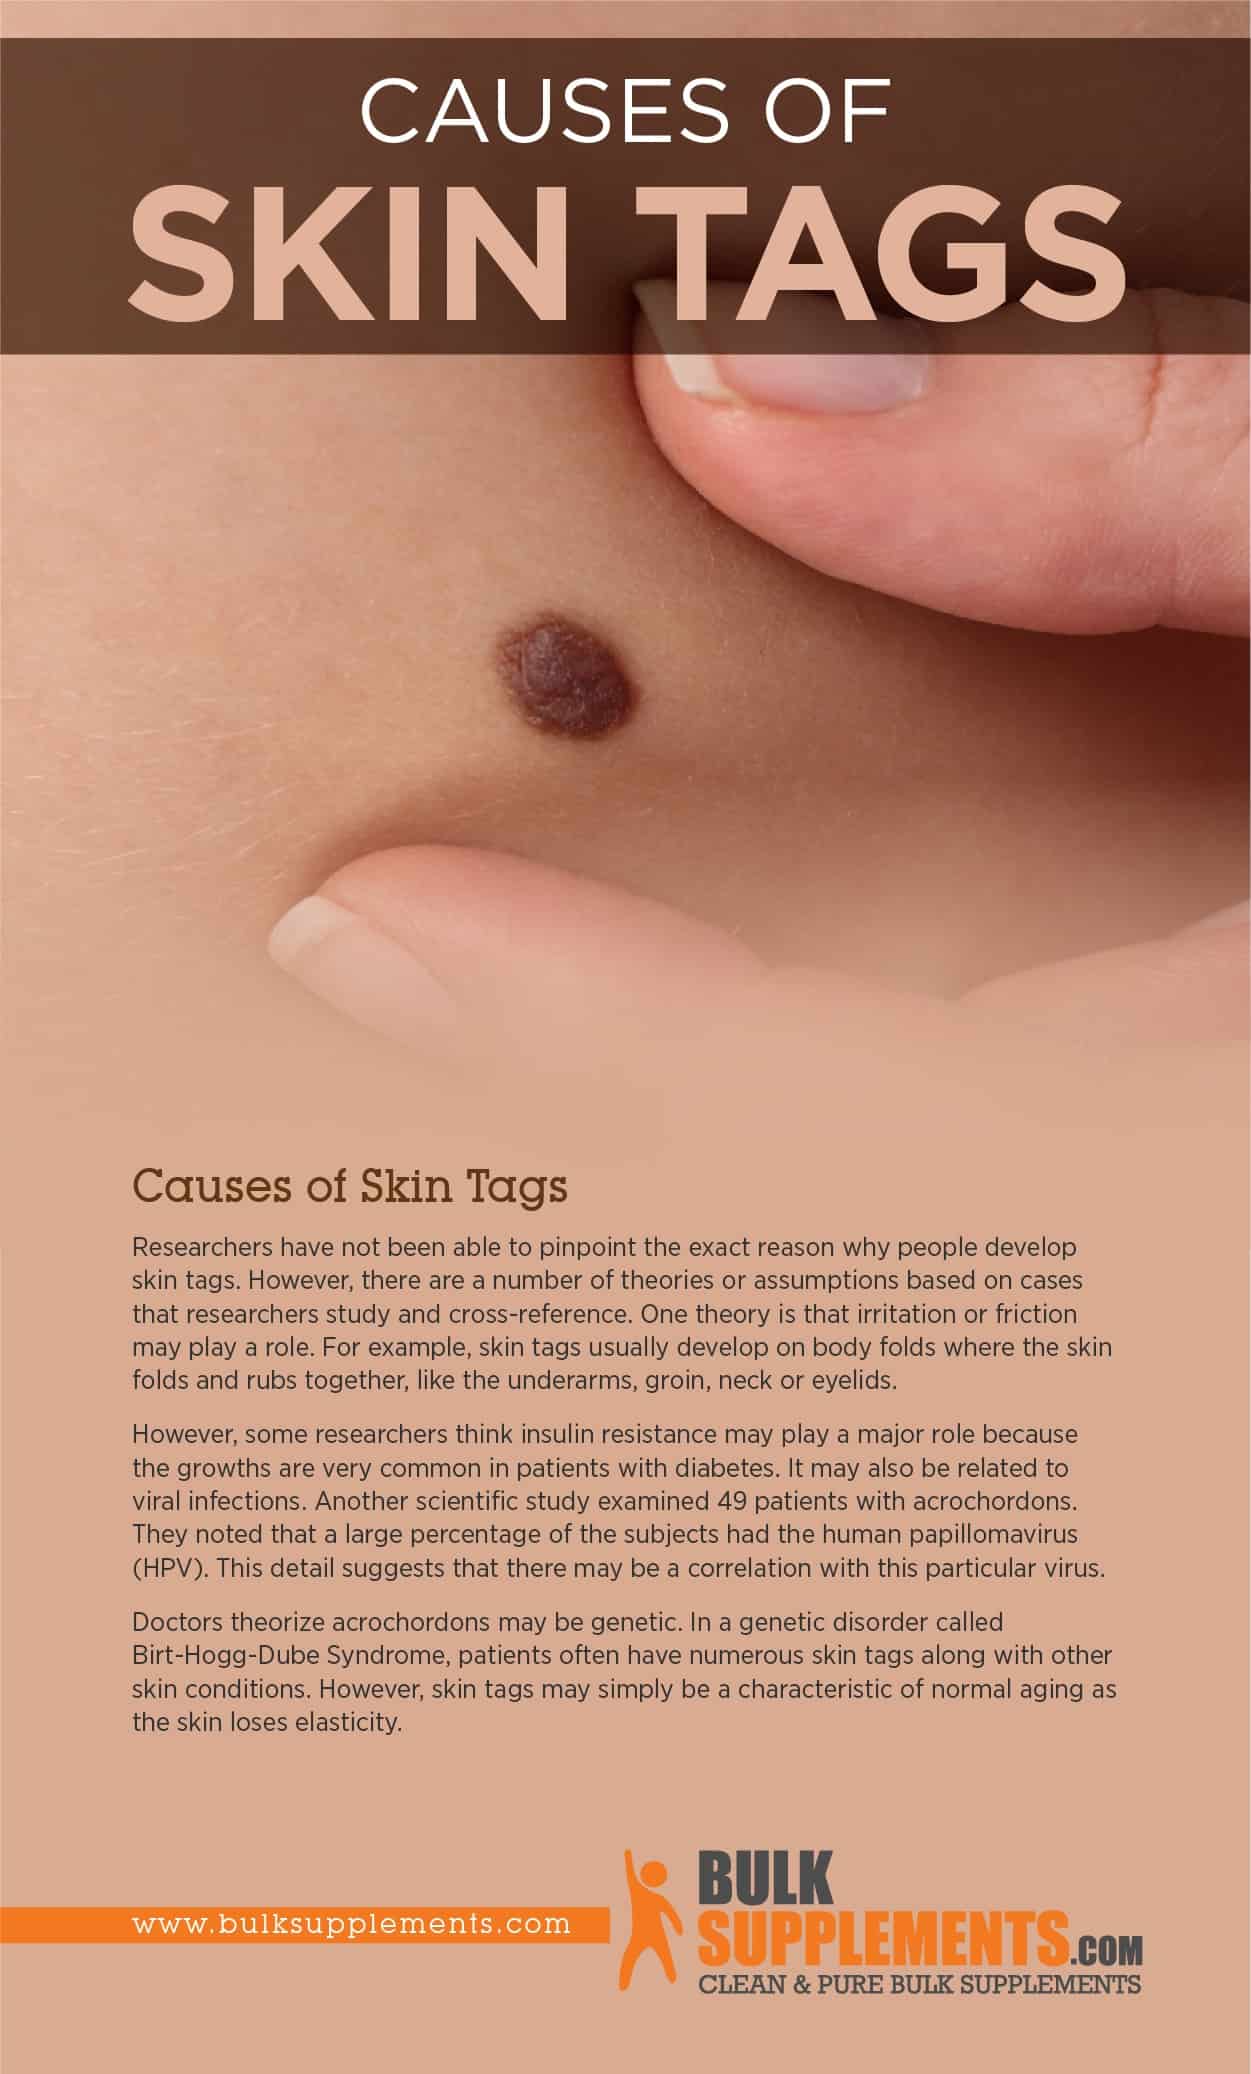 Causes of Skin Tags